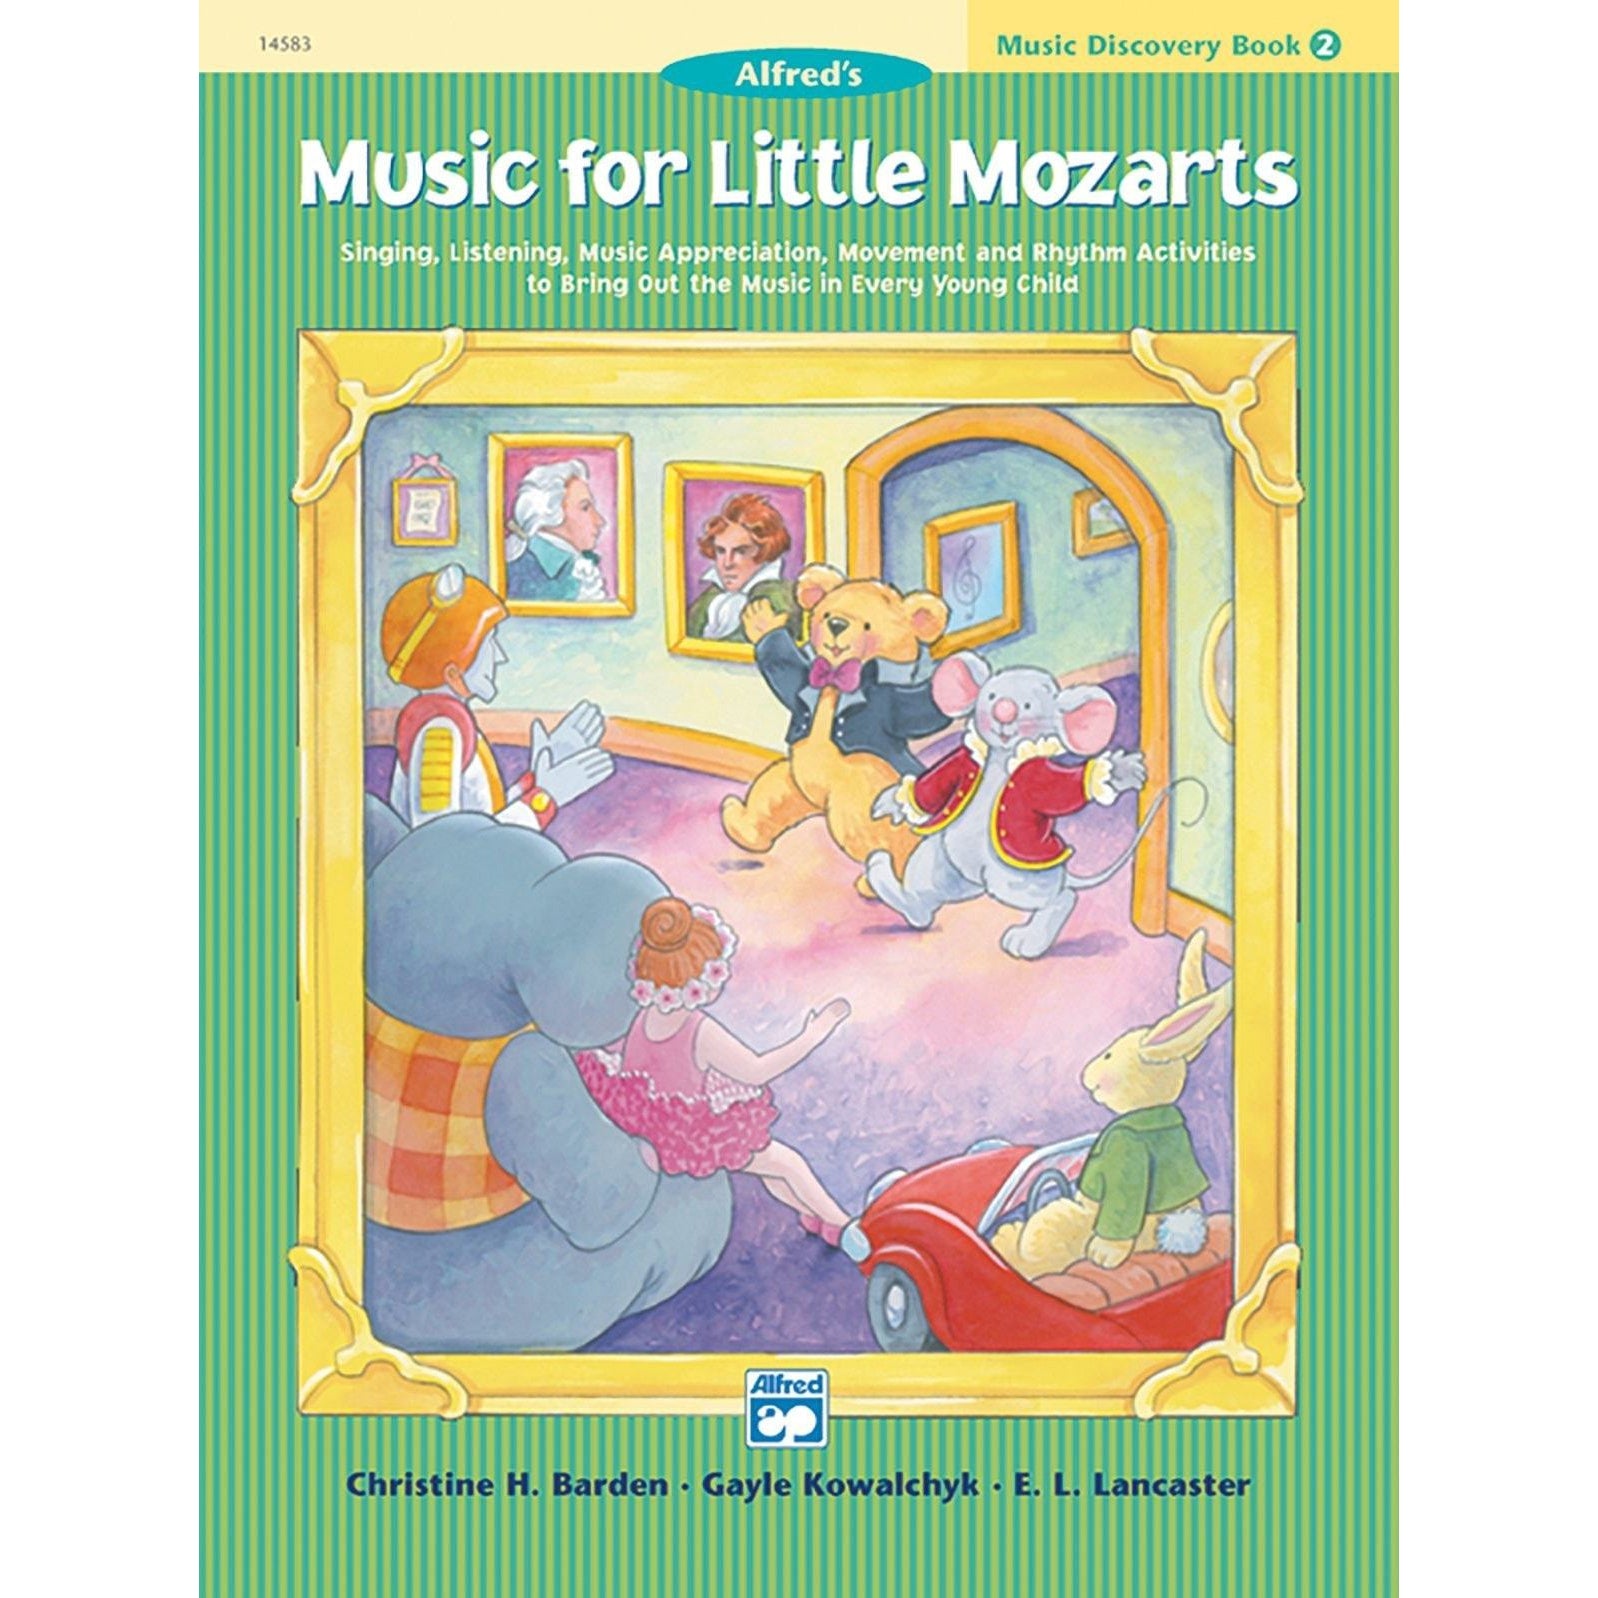 Music For Little Mozarts | Music Discovery Book 2